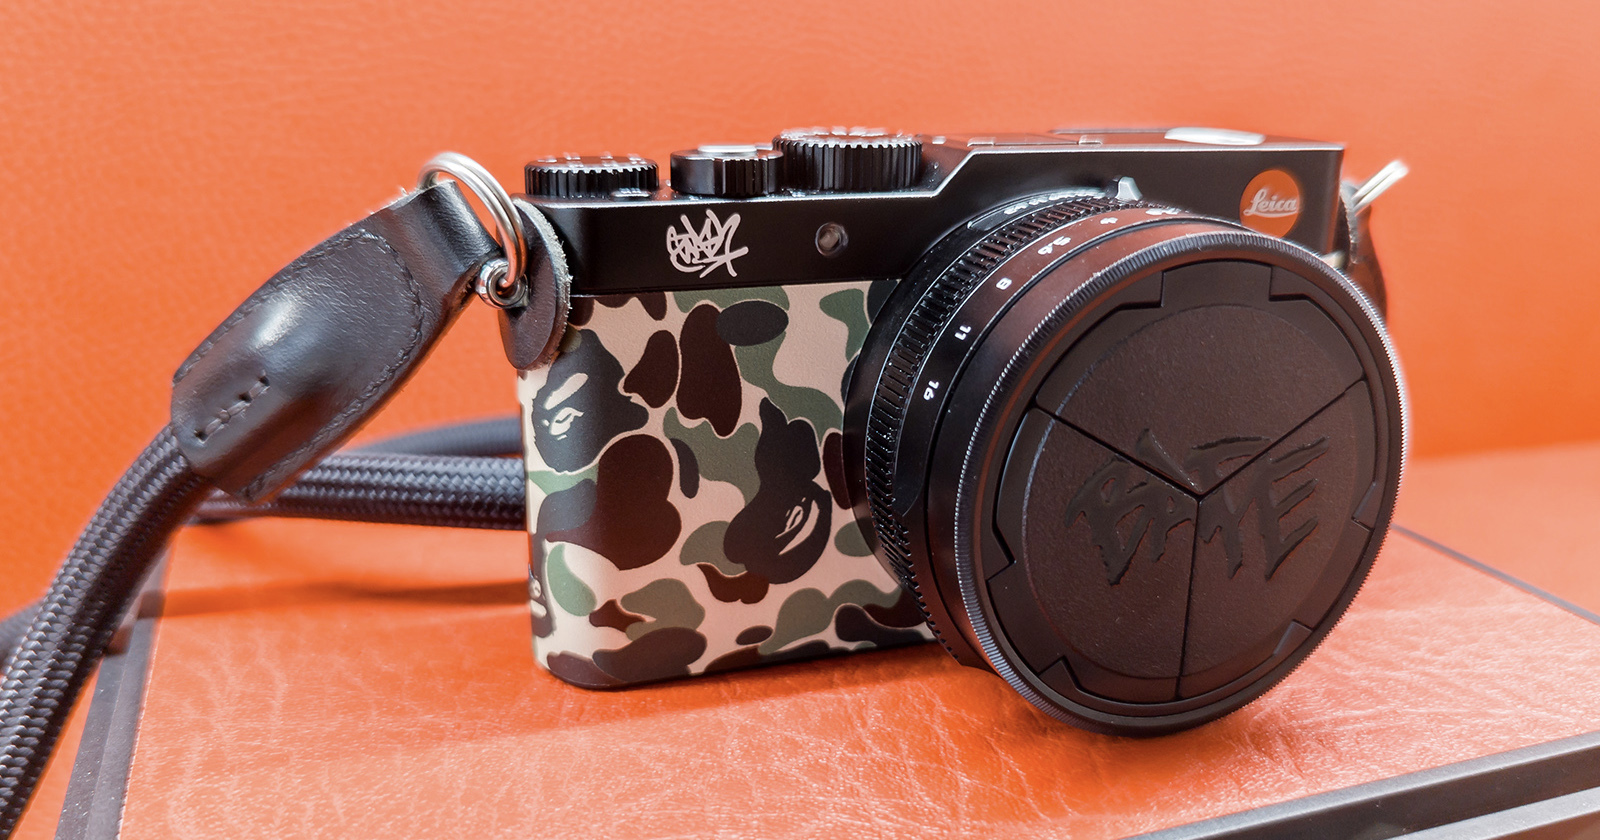 Leica D-Lux 7 Special Edition 007 - Luxsure